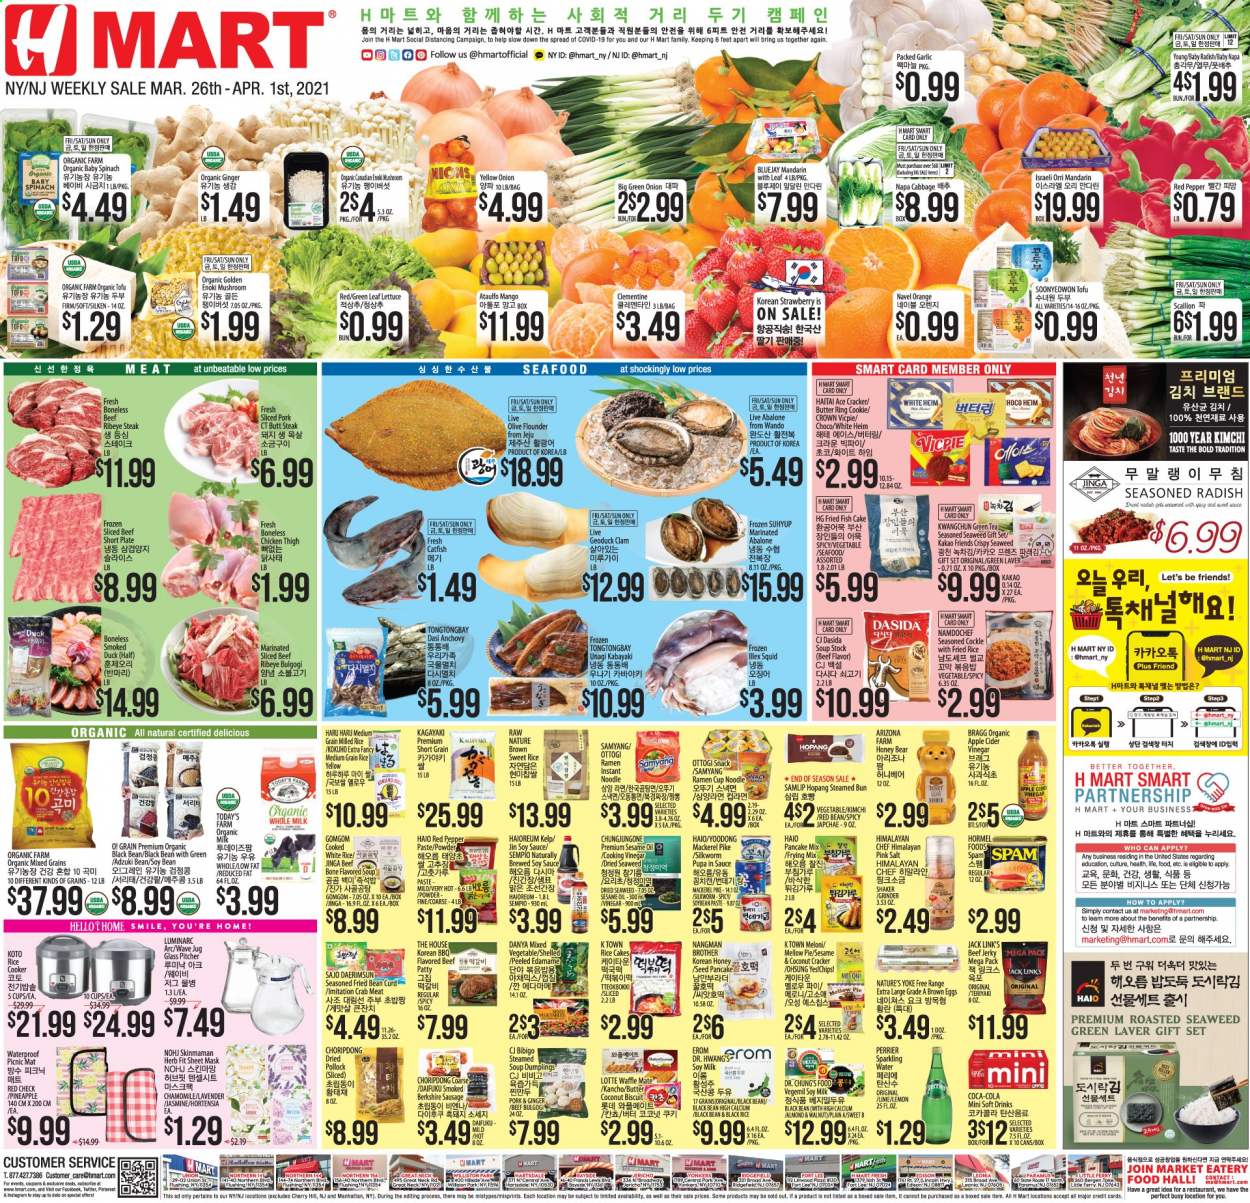 thumbnail - Hmart Flyer - 03/26/2021 - 04/01/2021 - Sales products - mushrooms, Edamame, lettuce, cake, pancakes, cabbage, chayote, catfish, clams, crab meat, flounder, squid, seafood, crab, fish, fried fish, ramen, steamed bun, soup, Hormel, jerky, Spam, butter, mango, spinach, fish cake, biscuit, seaweed, salt, garlic, mandarines, rice, herbs, vinegar, Coca-Cola, soft drink, AriZona, Perrier, sparkling water, beef meat, beef steak, steak, ribeye steak, gift set, plate, radishes, onion, green onion. Page 1.